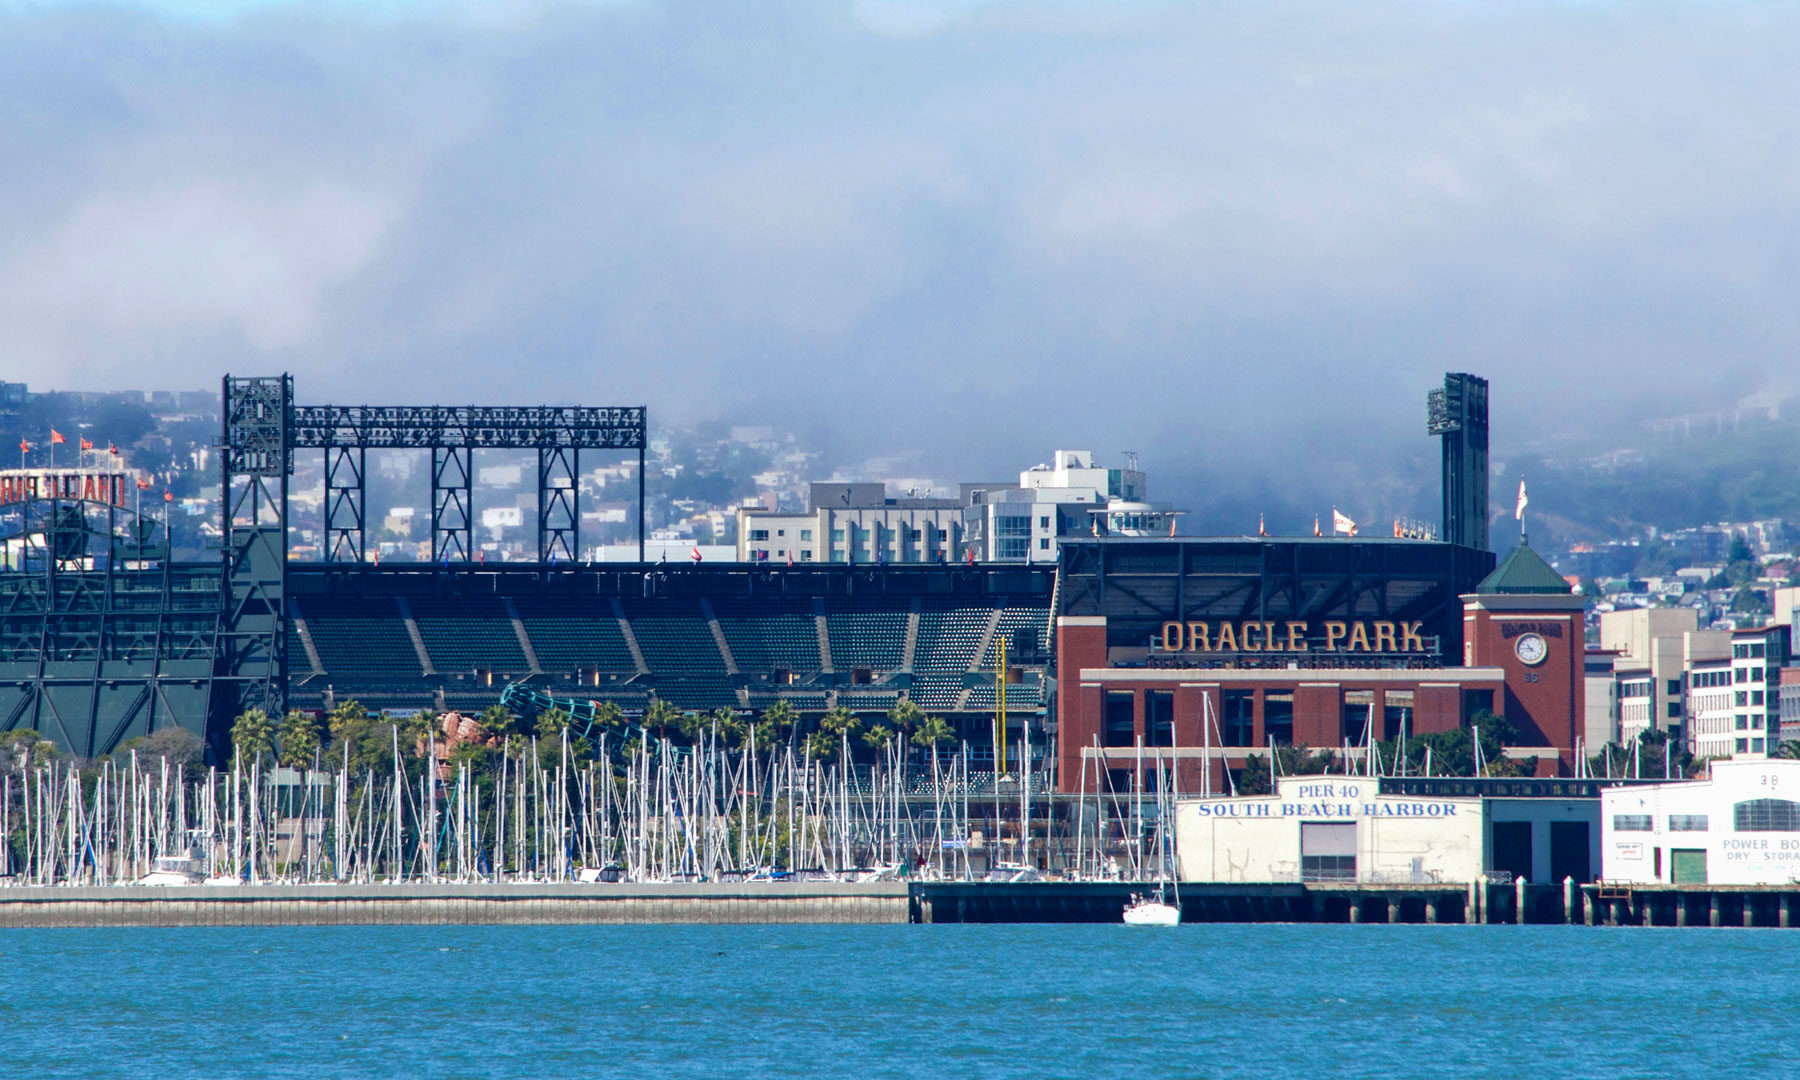 The Best Hotels Near Oracle Park in San Francisco, California